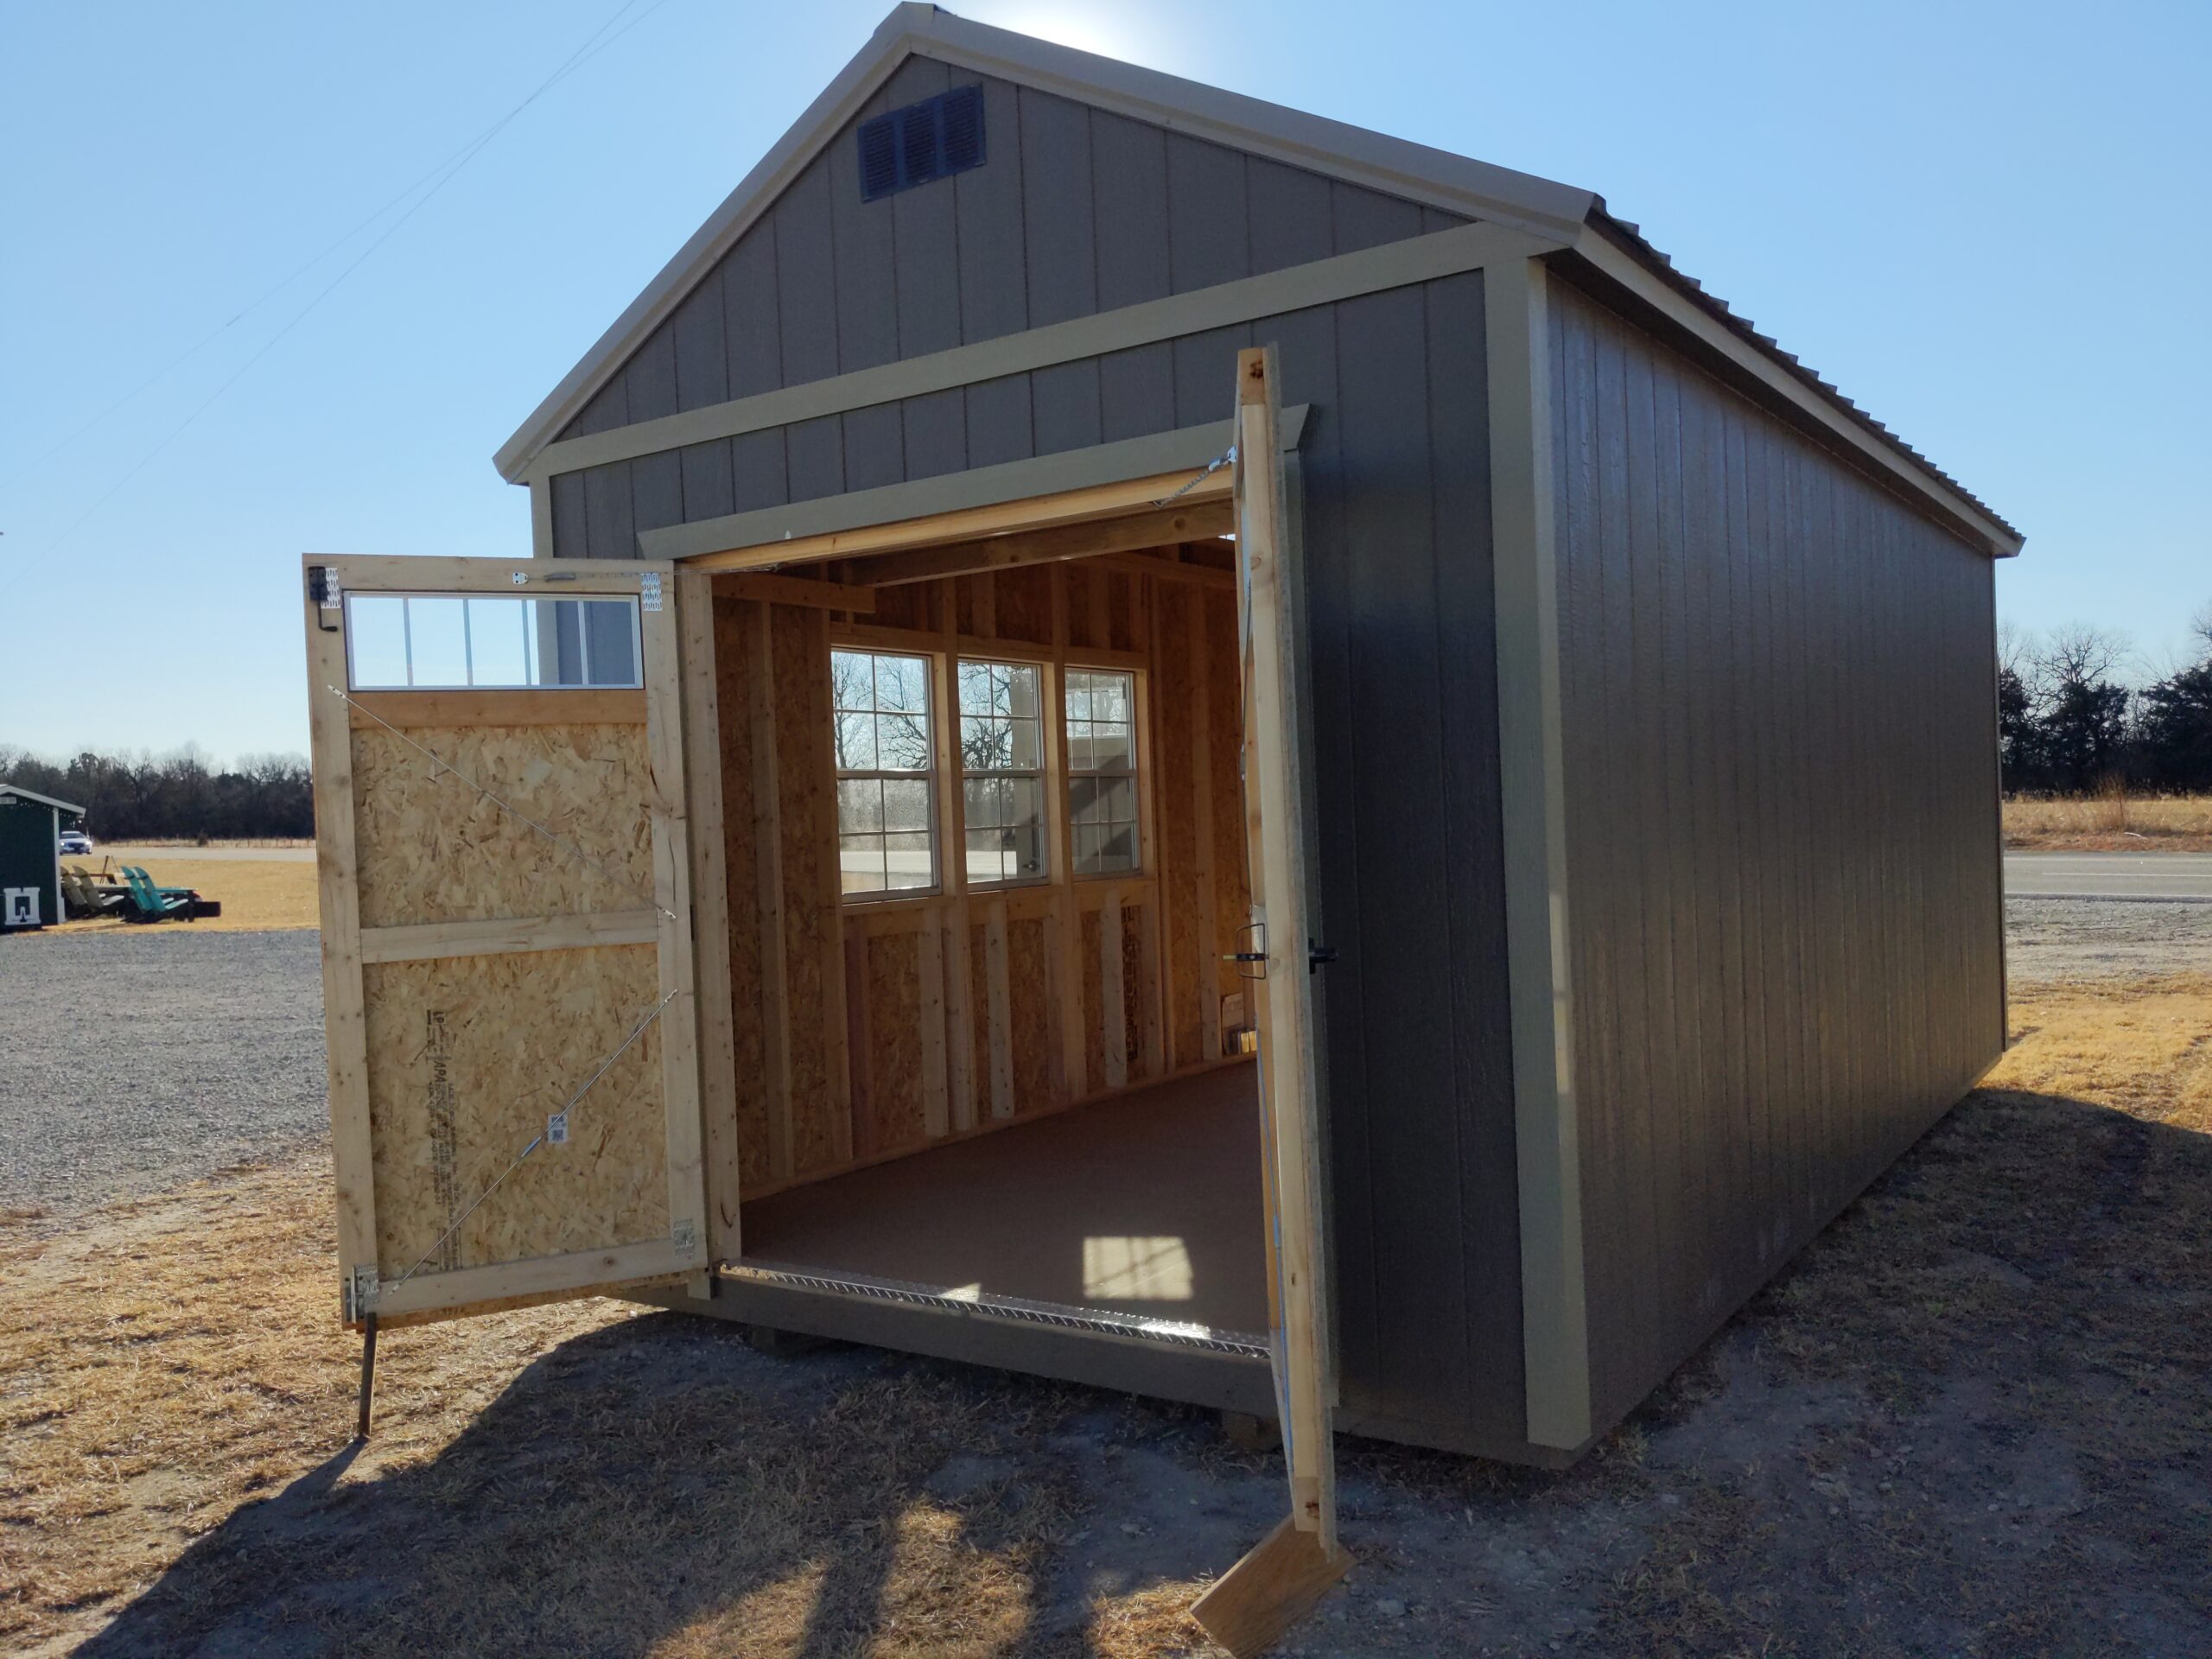 Riding Lawn Mower Storage Shed FOR SALE- Projective Portable Buildings